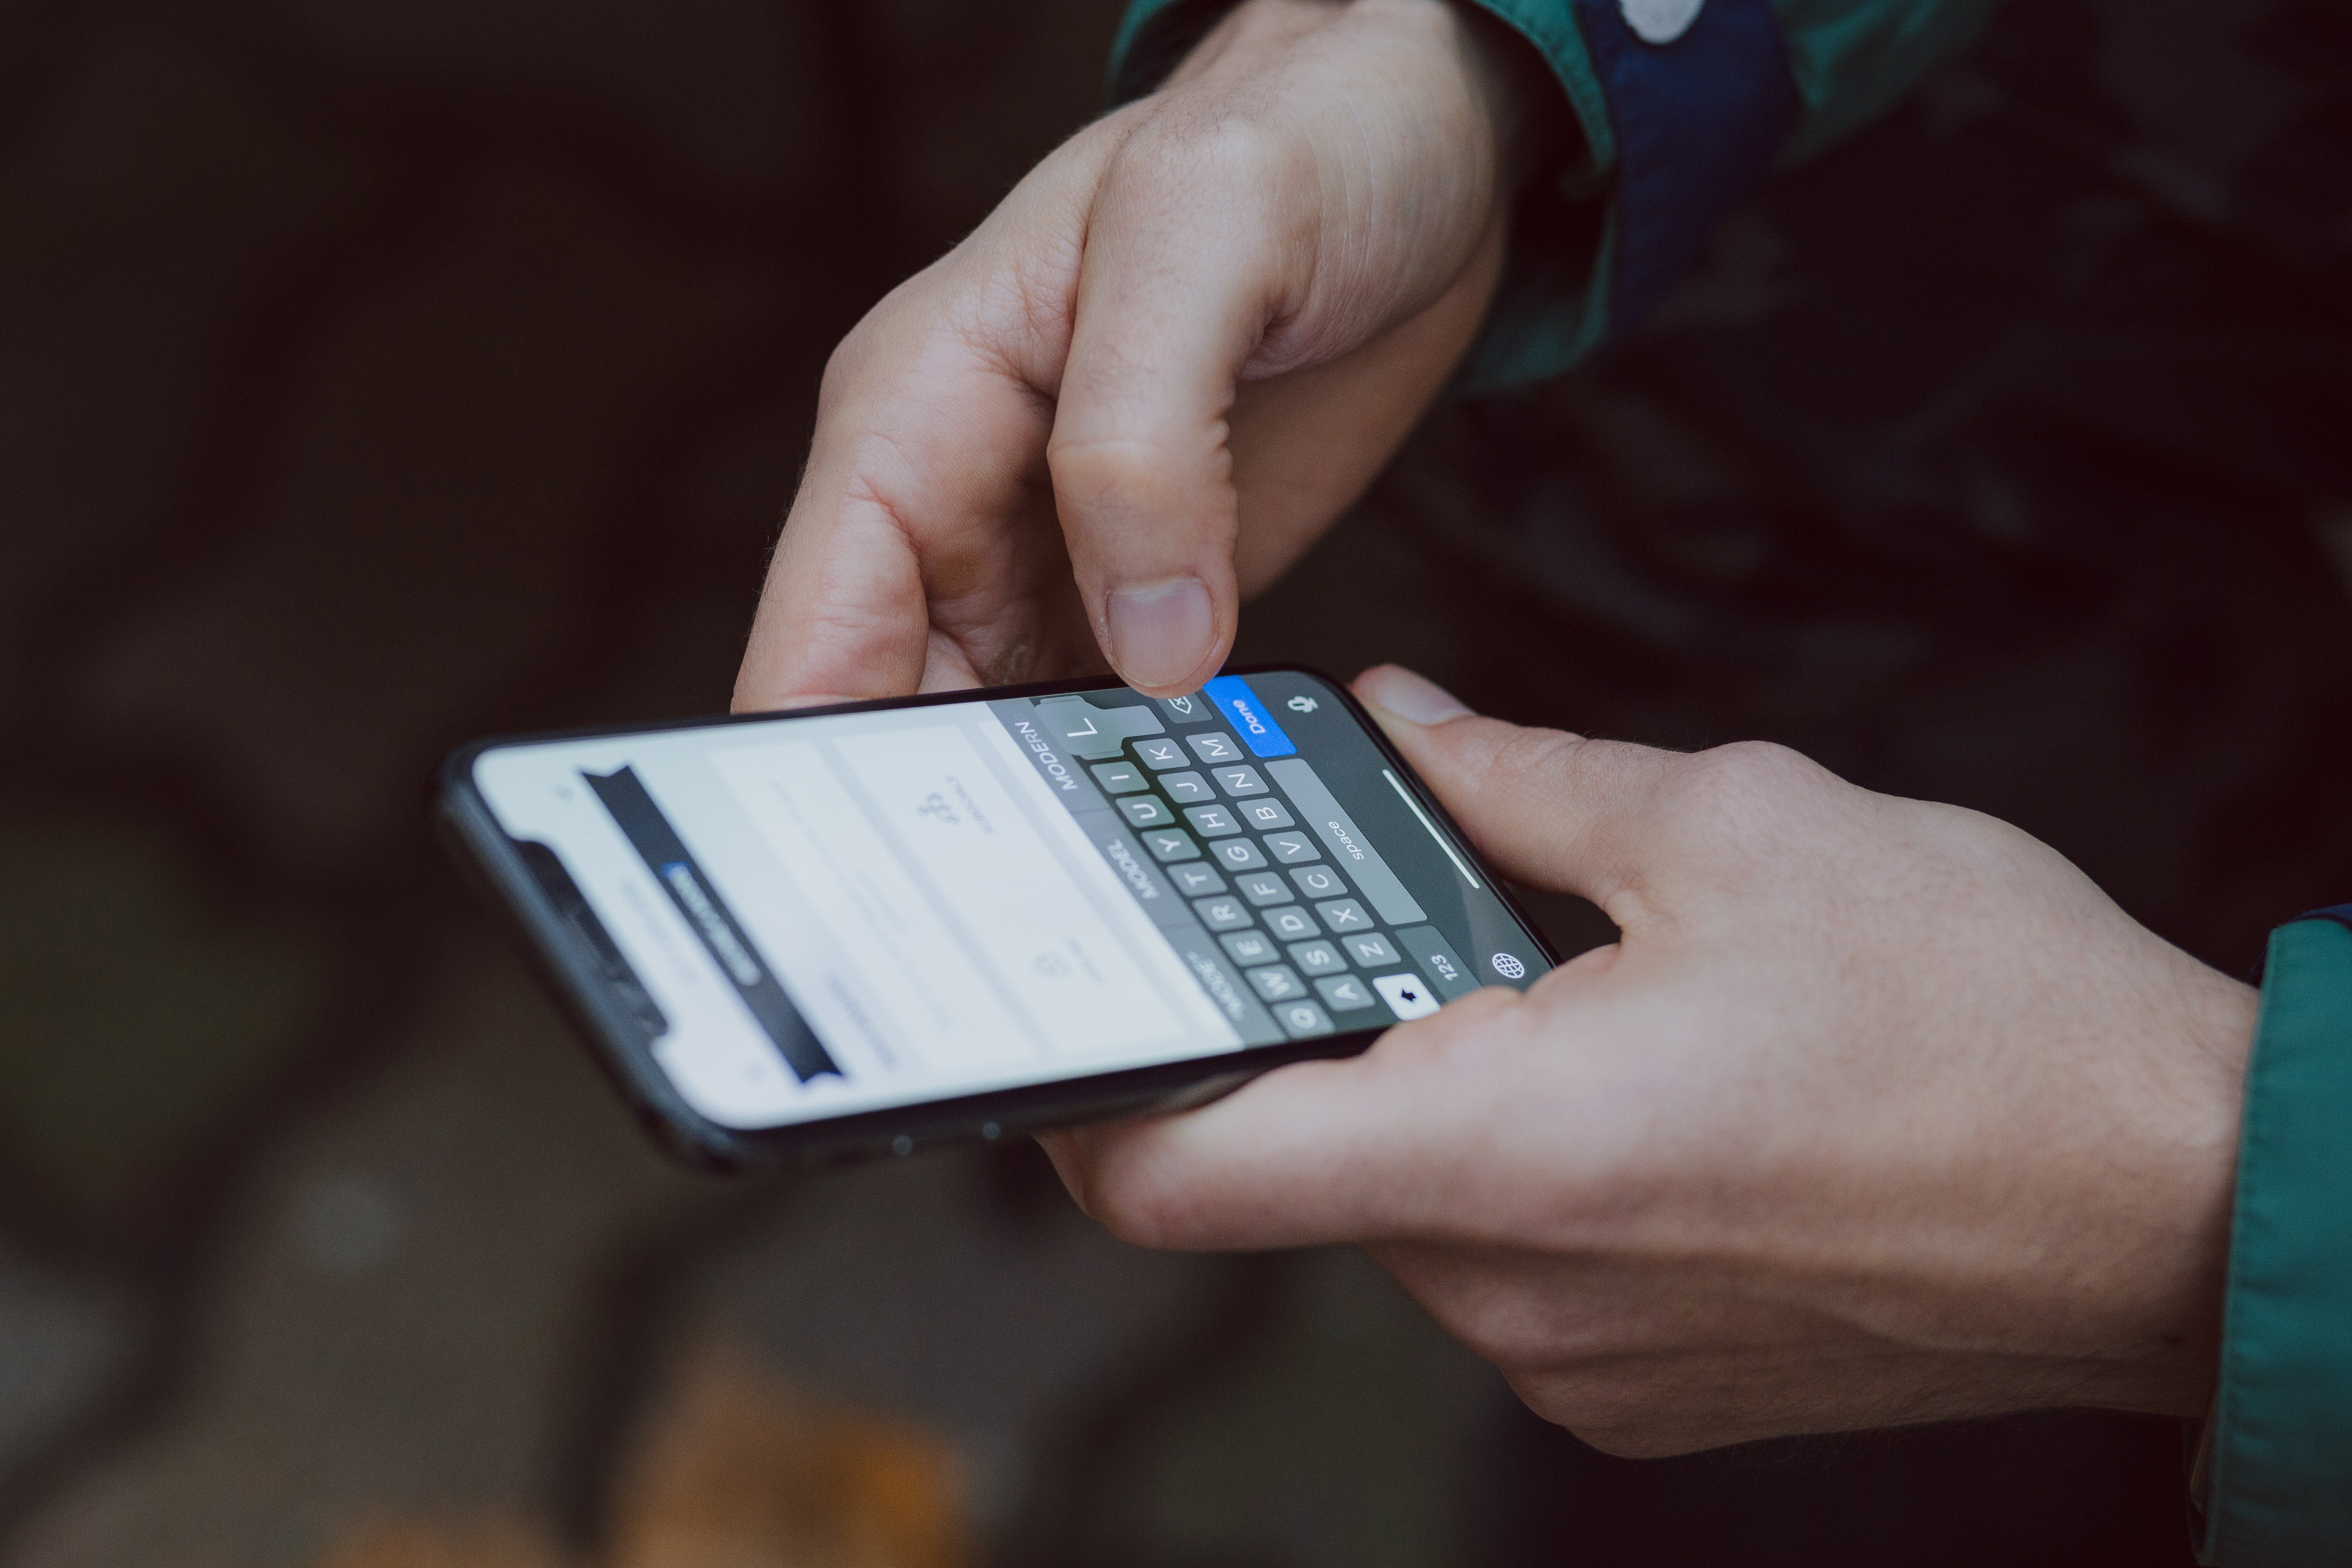 Fortunately for Peace, the device was unlocked, so she opened the full message and saw some other damning ones | Source: Pexels